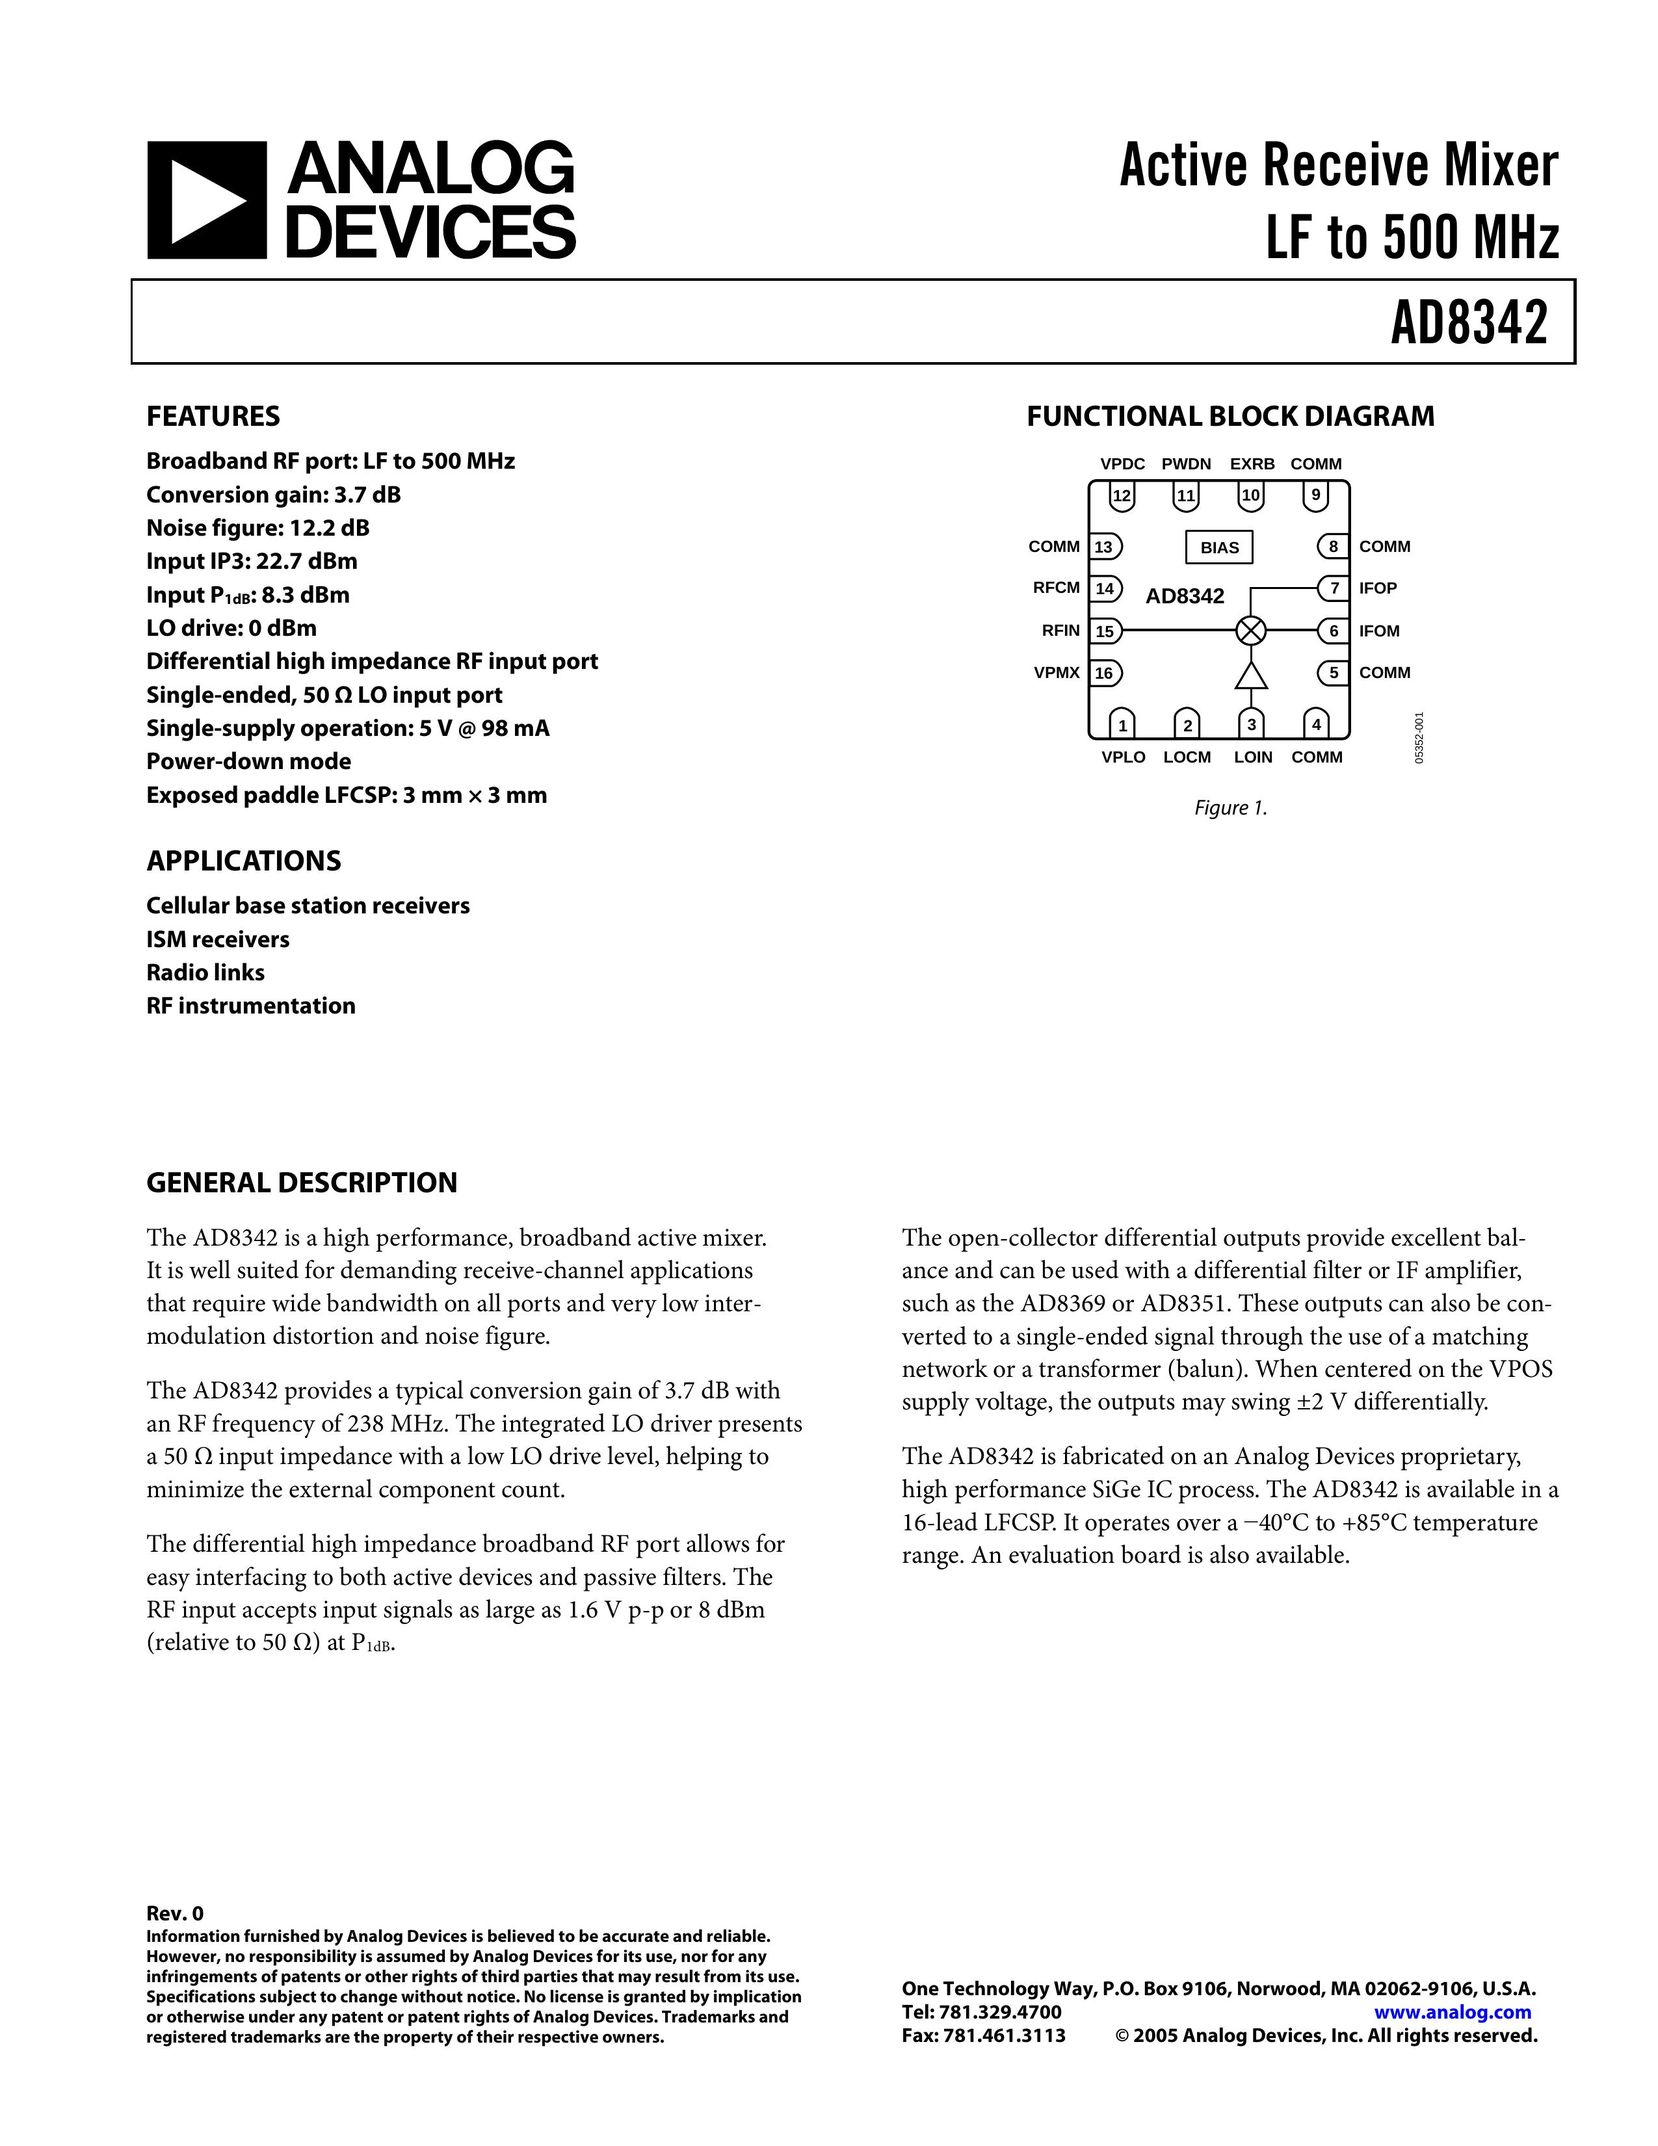 Analog Devices AD8342 Mixer User Manual